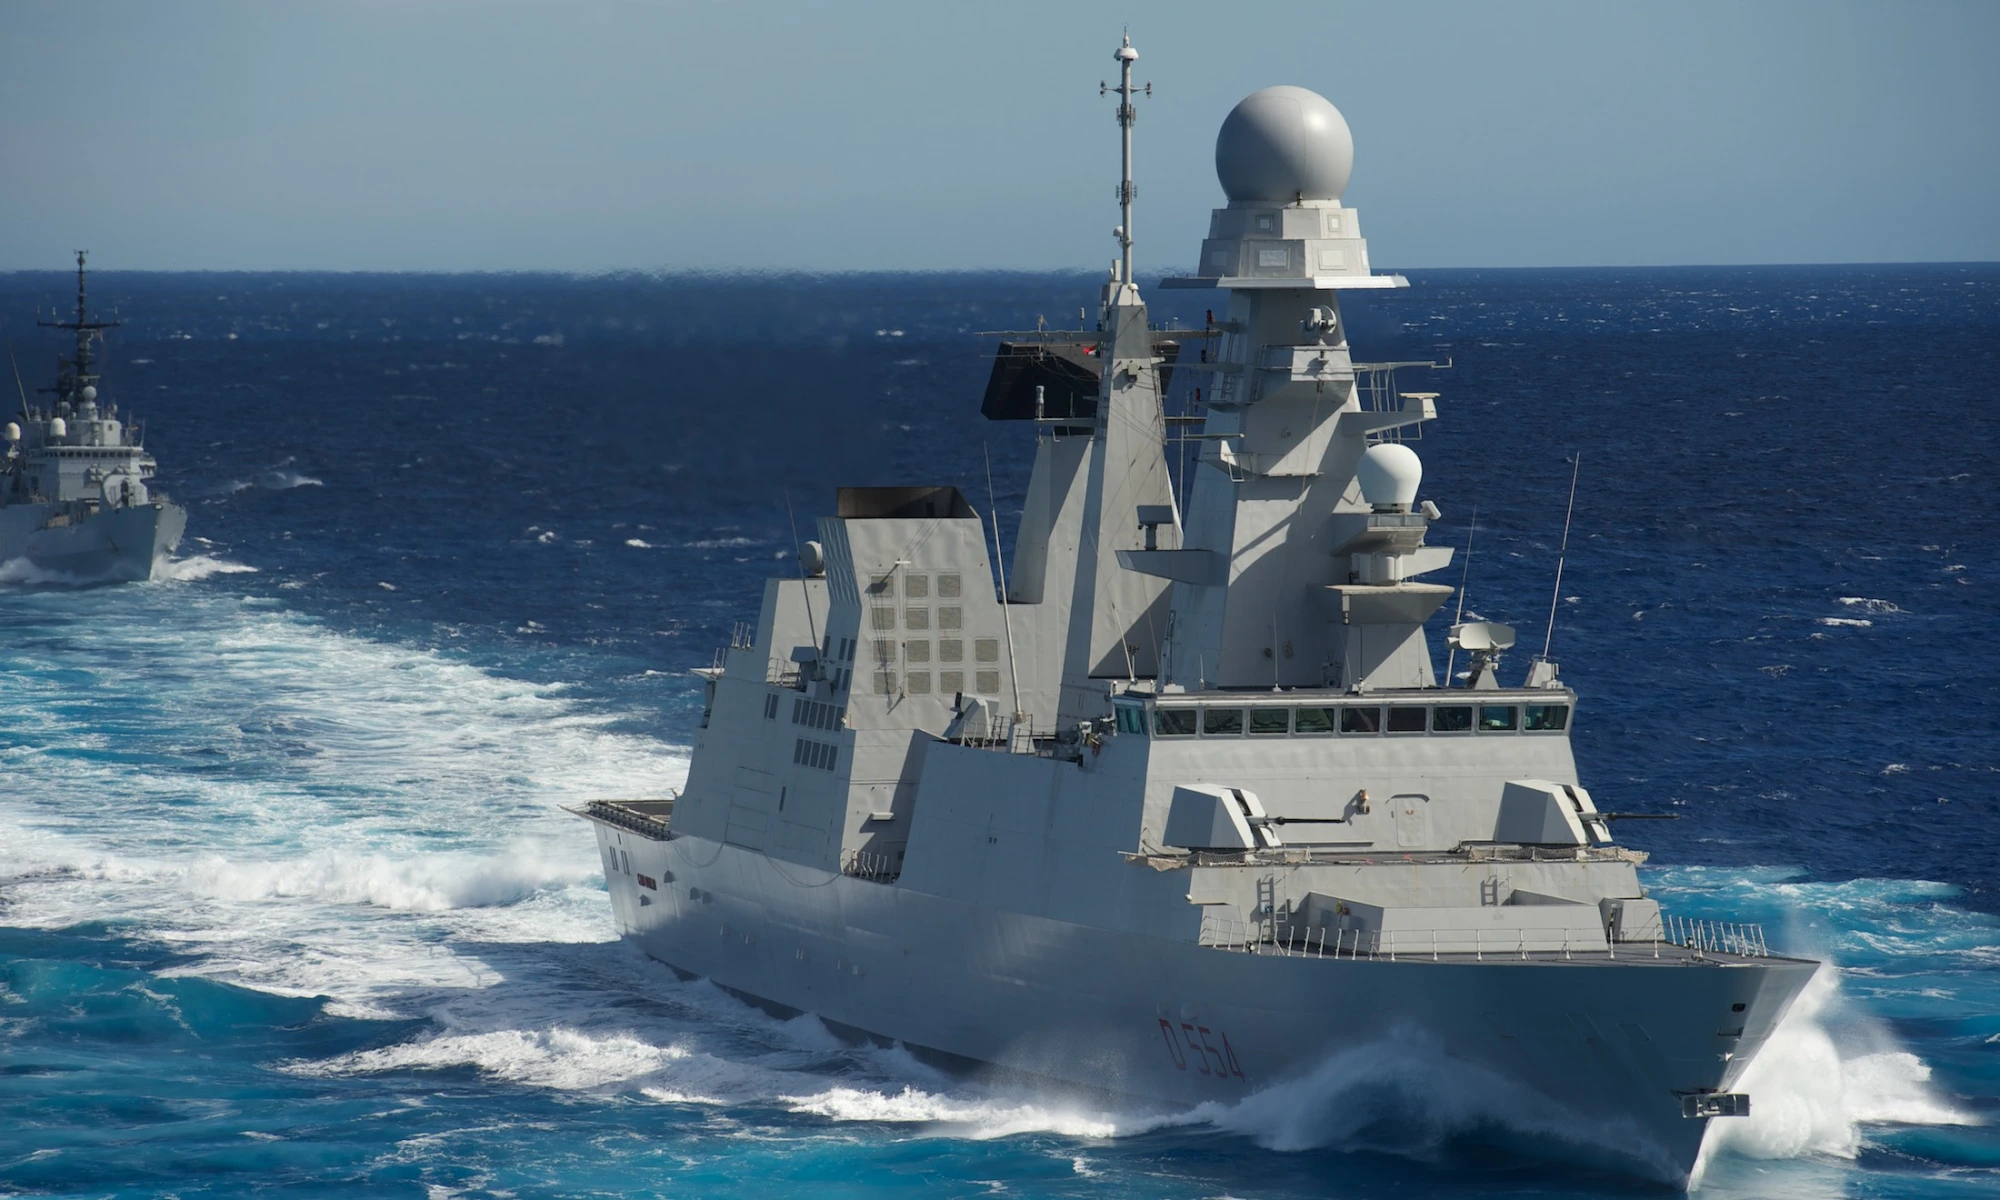 Top 15 Ships with Exceptional Design and Engineering in the World